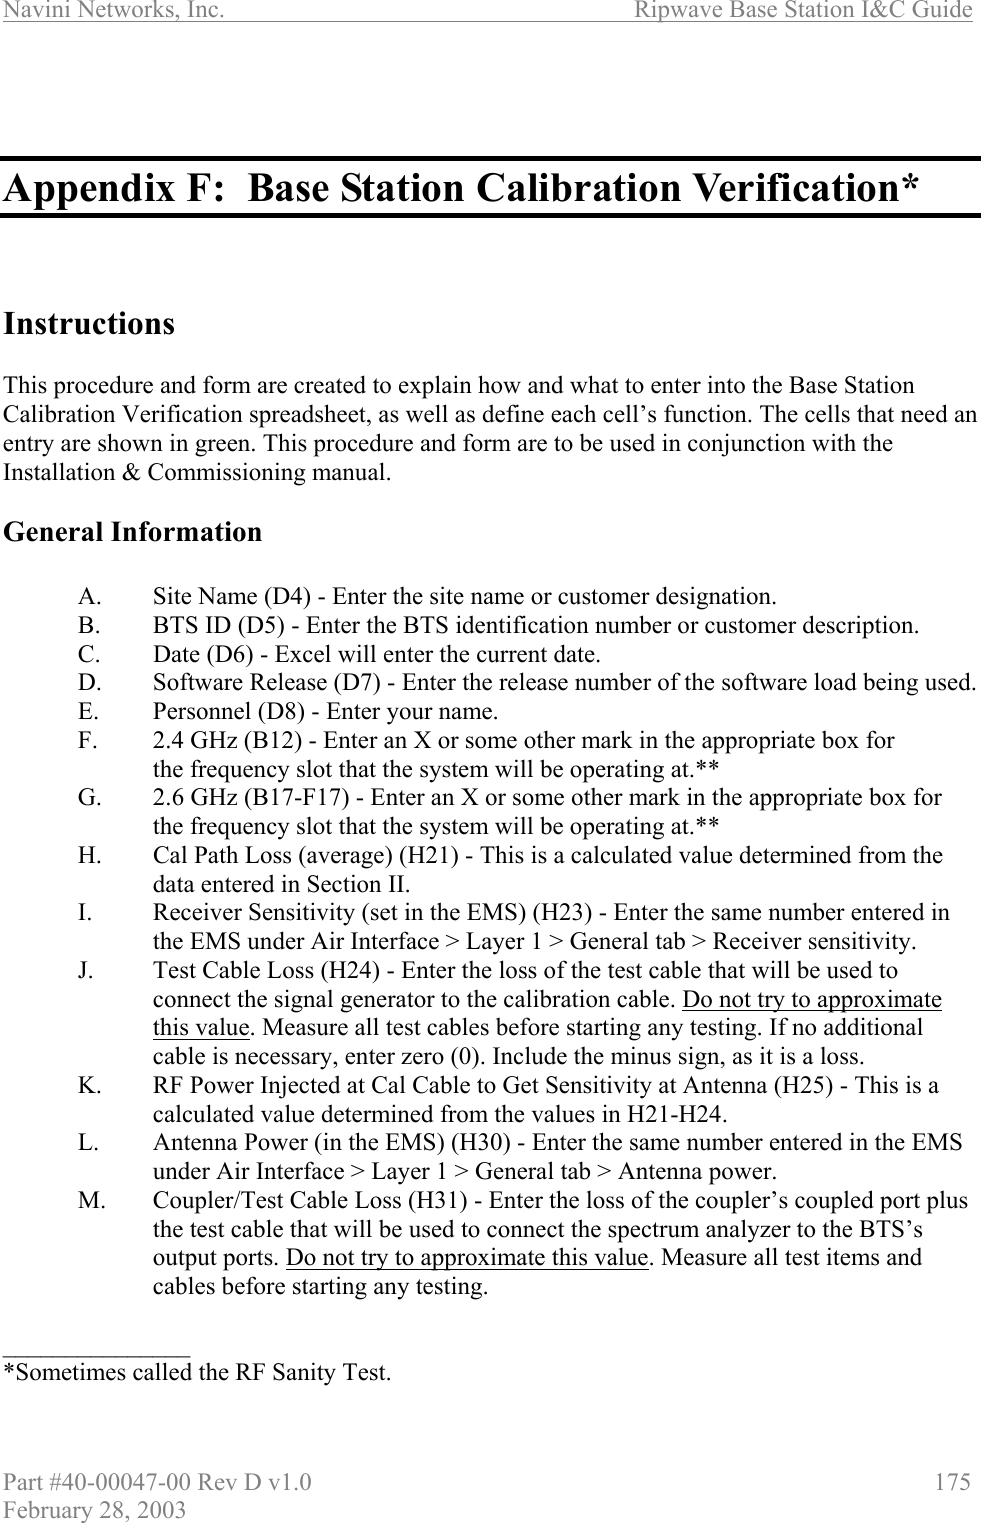 Navini Networks, Inc.                          Ripwave Base Station I&amp;C Guide Part #40-00047-00 Rev D v1.0                     175 February 28, 2003    Appendix F:  Base Station Calibration Verification*    Instructions  This procedure and form are created to explain how and what to enter into the Base Station Calibration Verification spreadsheet, as well as define each cell’s function. The cells that need an entry are shown in green. This procedure and form are to be used in conjunction with the Installation &amp; Commissioning manual.   General Information    A.  Site Name (D4) - Enter the site name or customer designation.   B.  BTS ID (D5) - Enter the BTS identification number or customer description.   C.  Date (D6) - Excel will enter the current date.   D.  Software Release (D7) - Enter the release number of the software load being used.   E.  Personnel (D8) - Enter your name.   F.  2.4 GHz (B12) - Enter an X or some other mark in the appropriate box for   the frequency slot that the system will be operating at.**   G.  2.6 GHz (B17-F17) - Enter an X or some other mark in the appropriate box for     the frequency slot that the system will be operating at.** H.  Cal Path Loss (average) (H21) - This is a calculated value determined from the data entered in Section II. I.  Receiver Sensitivity (set in the EMS) (H23) - Enter the same number entered in the EMS under Air Interface &gt; Layer 1 &gt; General tab &gt; Receiver sensitivity. J.  Test Cable Loss (H24) - Enter the loss of the test cable that will be used to connect the signal generator to the calibration cable. Do not try to approximate this value. Measure all test cables before starting any testing. If no additional cable is necessary, enter zero (0). Include the minus sign, as it is a loss. K.  RF Power Injected at Cal Cable to Get Sensitivity at Antenna (H25) - This is a calculated value determined from the values in H21-H24. L.  Antenna Power (in the EMS) (H30) - Enter the same number entered in the EMS under Air Interface &gt; Layer 1 &gt; General tab &gt; Antenna power. M.  Coupler/Test Cable Loss (H31) - Enter the loss of the coupler’s coupled port plus the test cable that will be used to connect the spectrum analyzer to the BTS’s output ports. Do not try to approximate this value. Measure all test items and cables before starting any testing.  _______________ *Sometimes called the RF Sanity Test.  